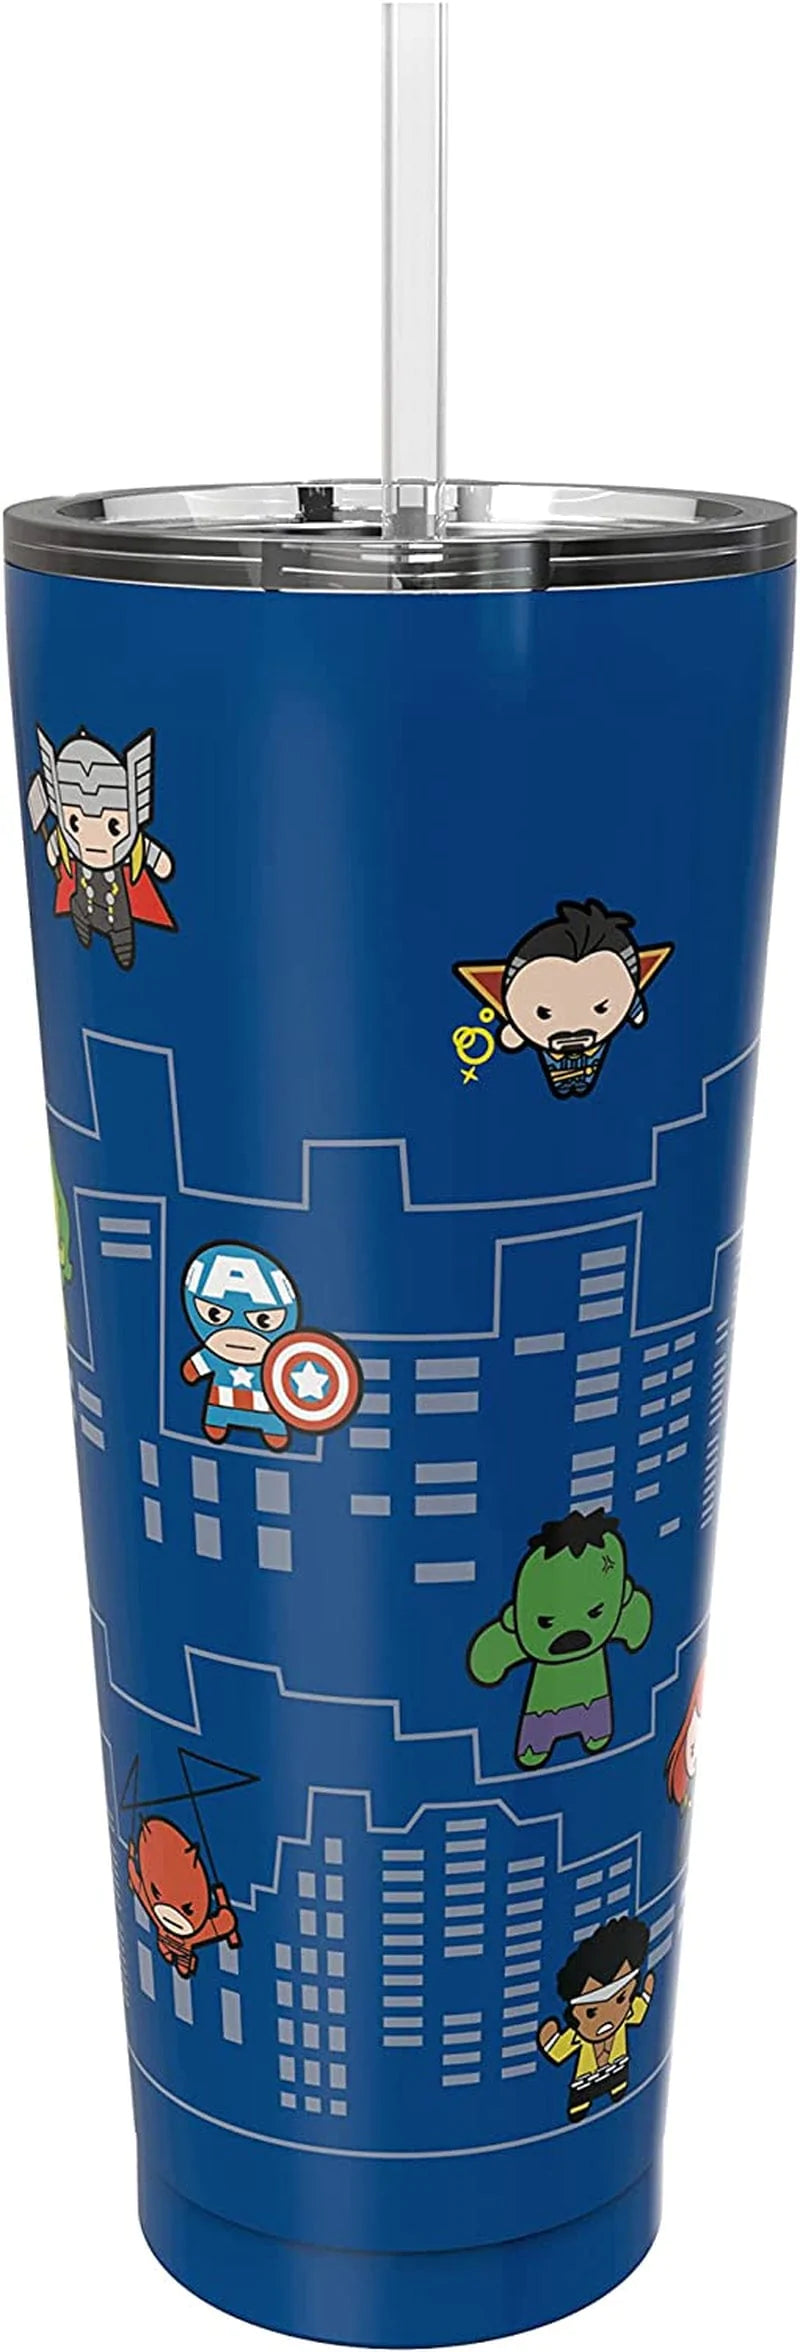 Zak Designs Sanrio Hello Kitty Vacuum Insulated Stainless Steel Travel Tumbler with Splash-Proof Lid, Includes Reusable Plastic Straw and Fits in Car Cup Holders (18/8 SS, 25 Oz) Home & Garden > Kitchen & Dining > Tableware > Drinkware Zak Designs Marvel Avengers 1 Count (Pack of 1) 